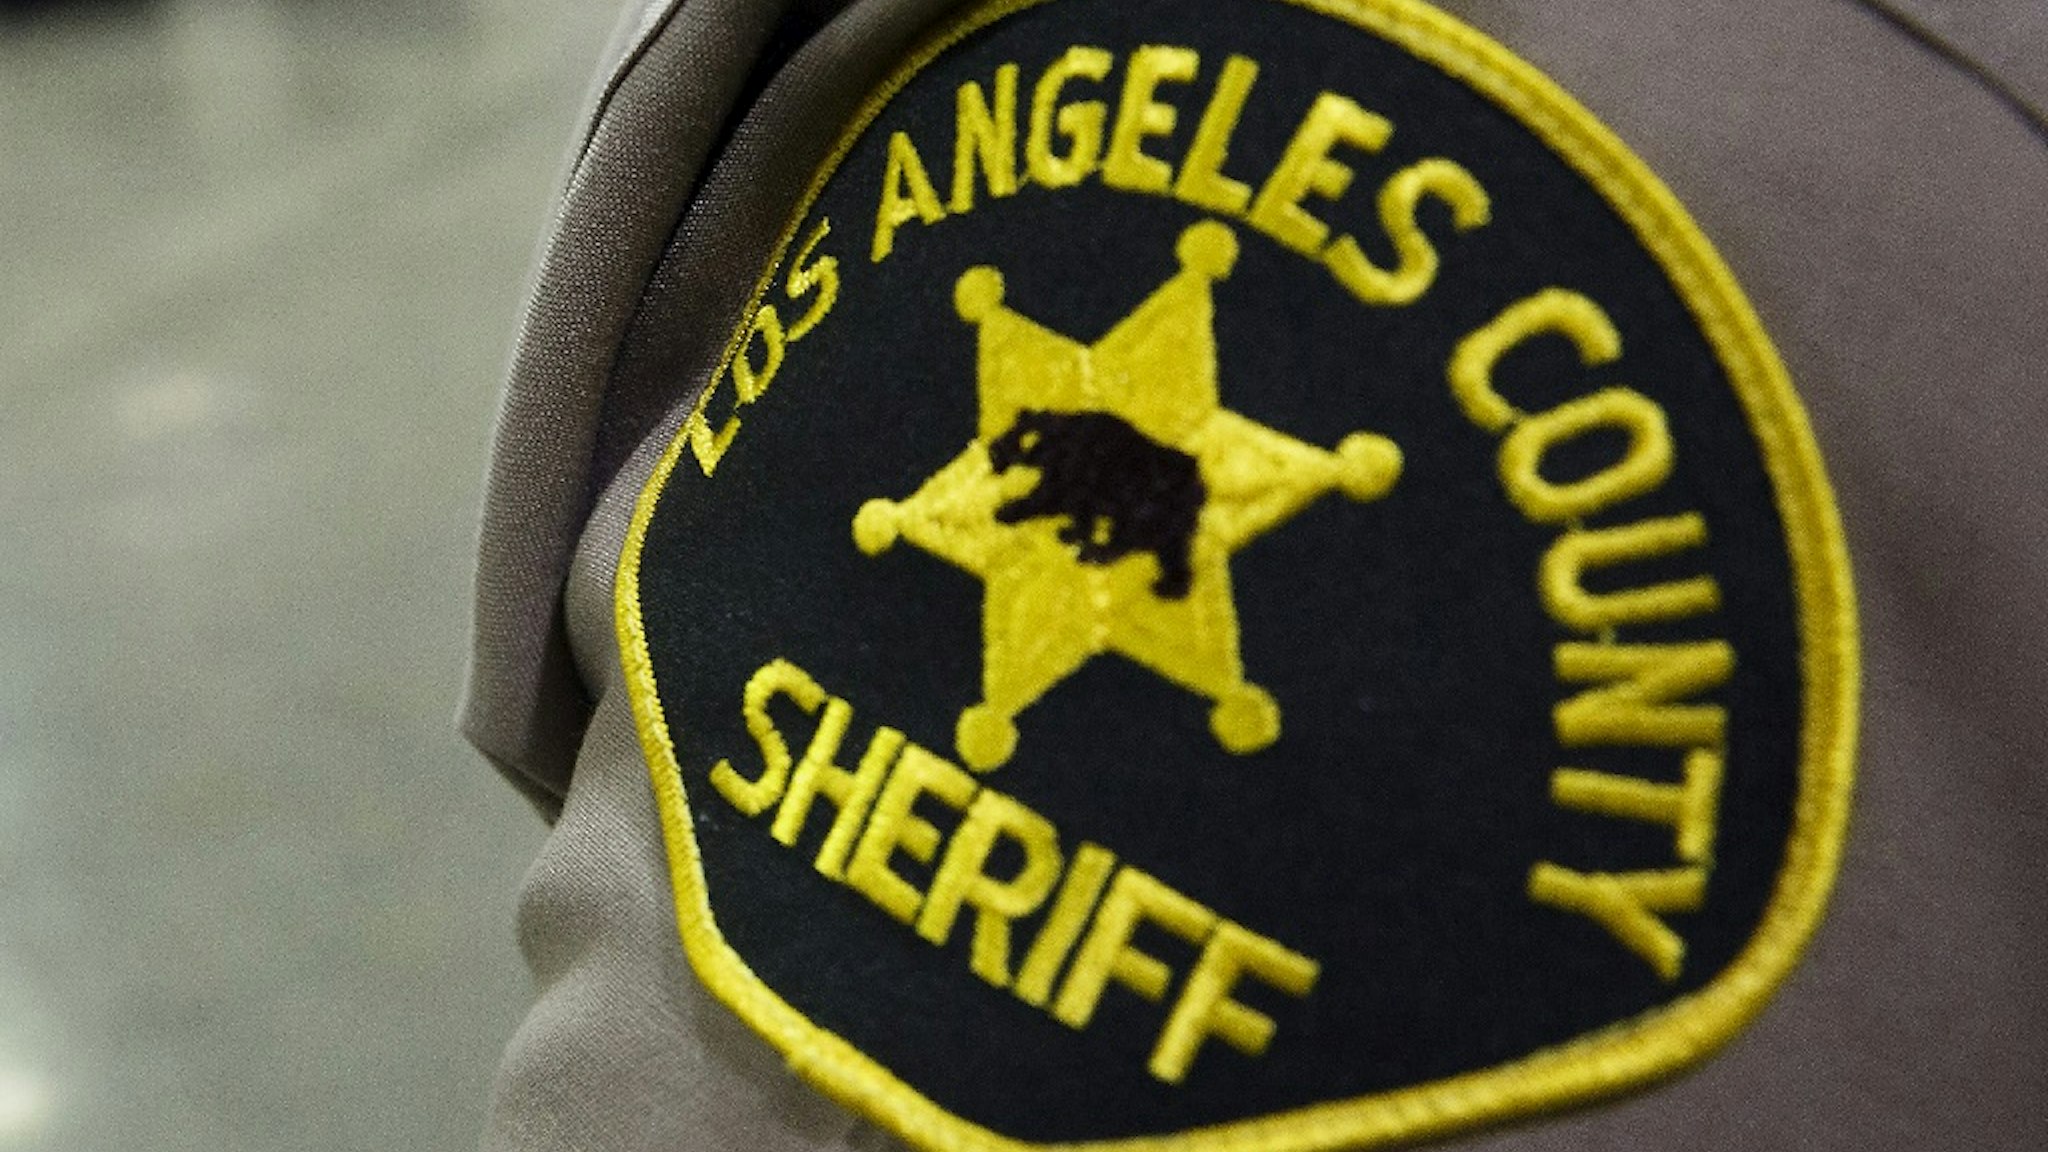 A Los Angeles County Sheriffs Department patch is seen on the shoulder of a deputy at the Los Angeles County Sheriffs Department Twin Towers Correctional Facility in Los Angeles, California, U.S., on Tuesday, Sept. 23, 2014.